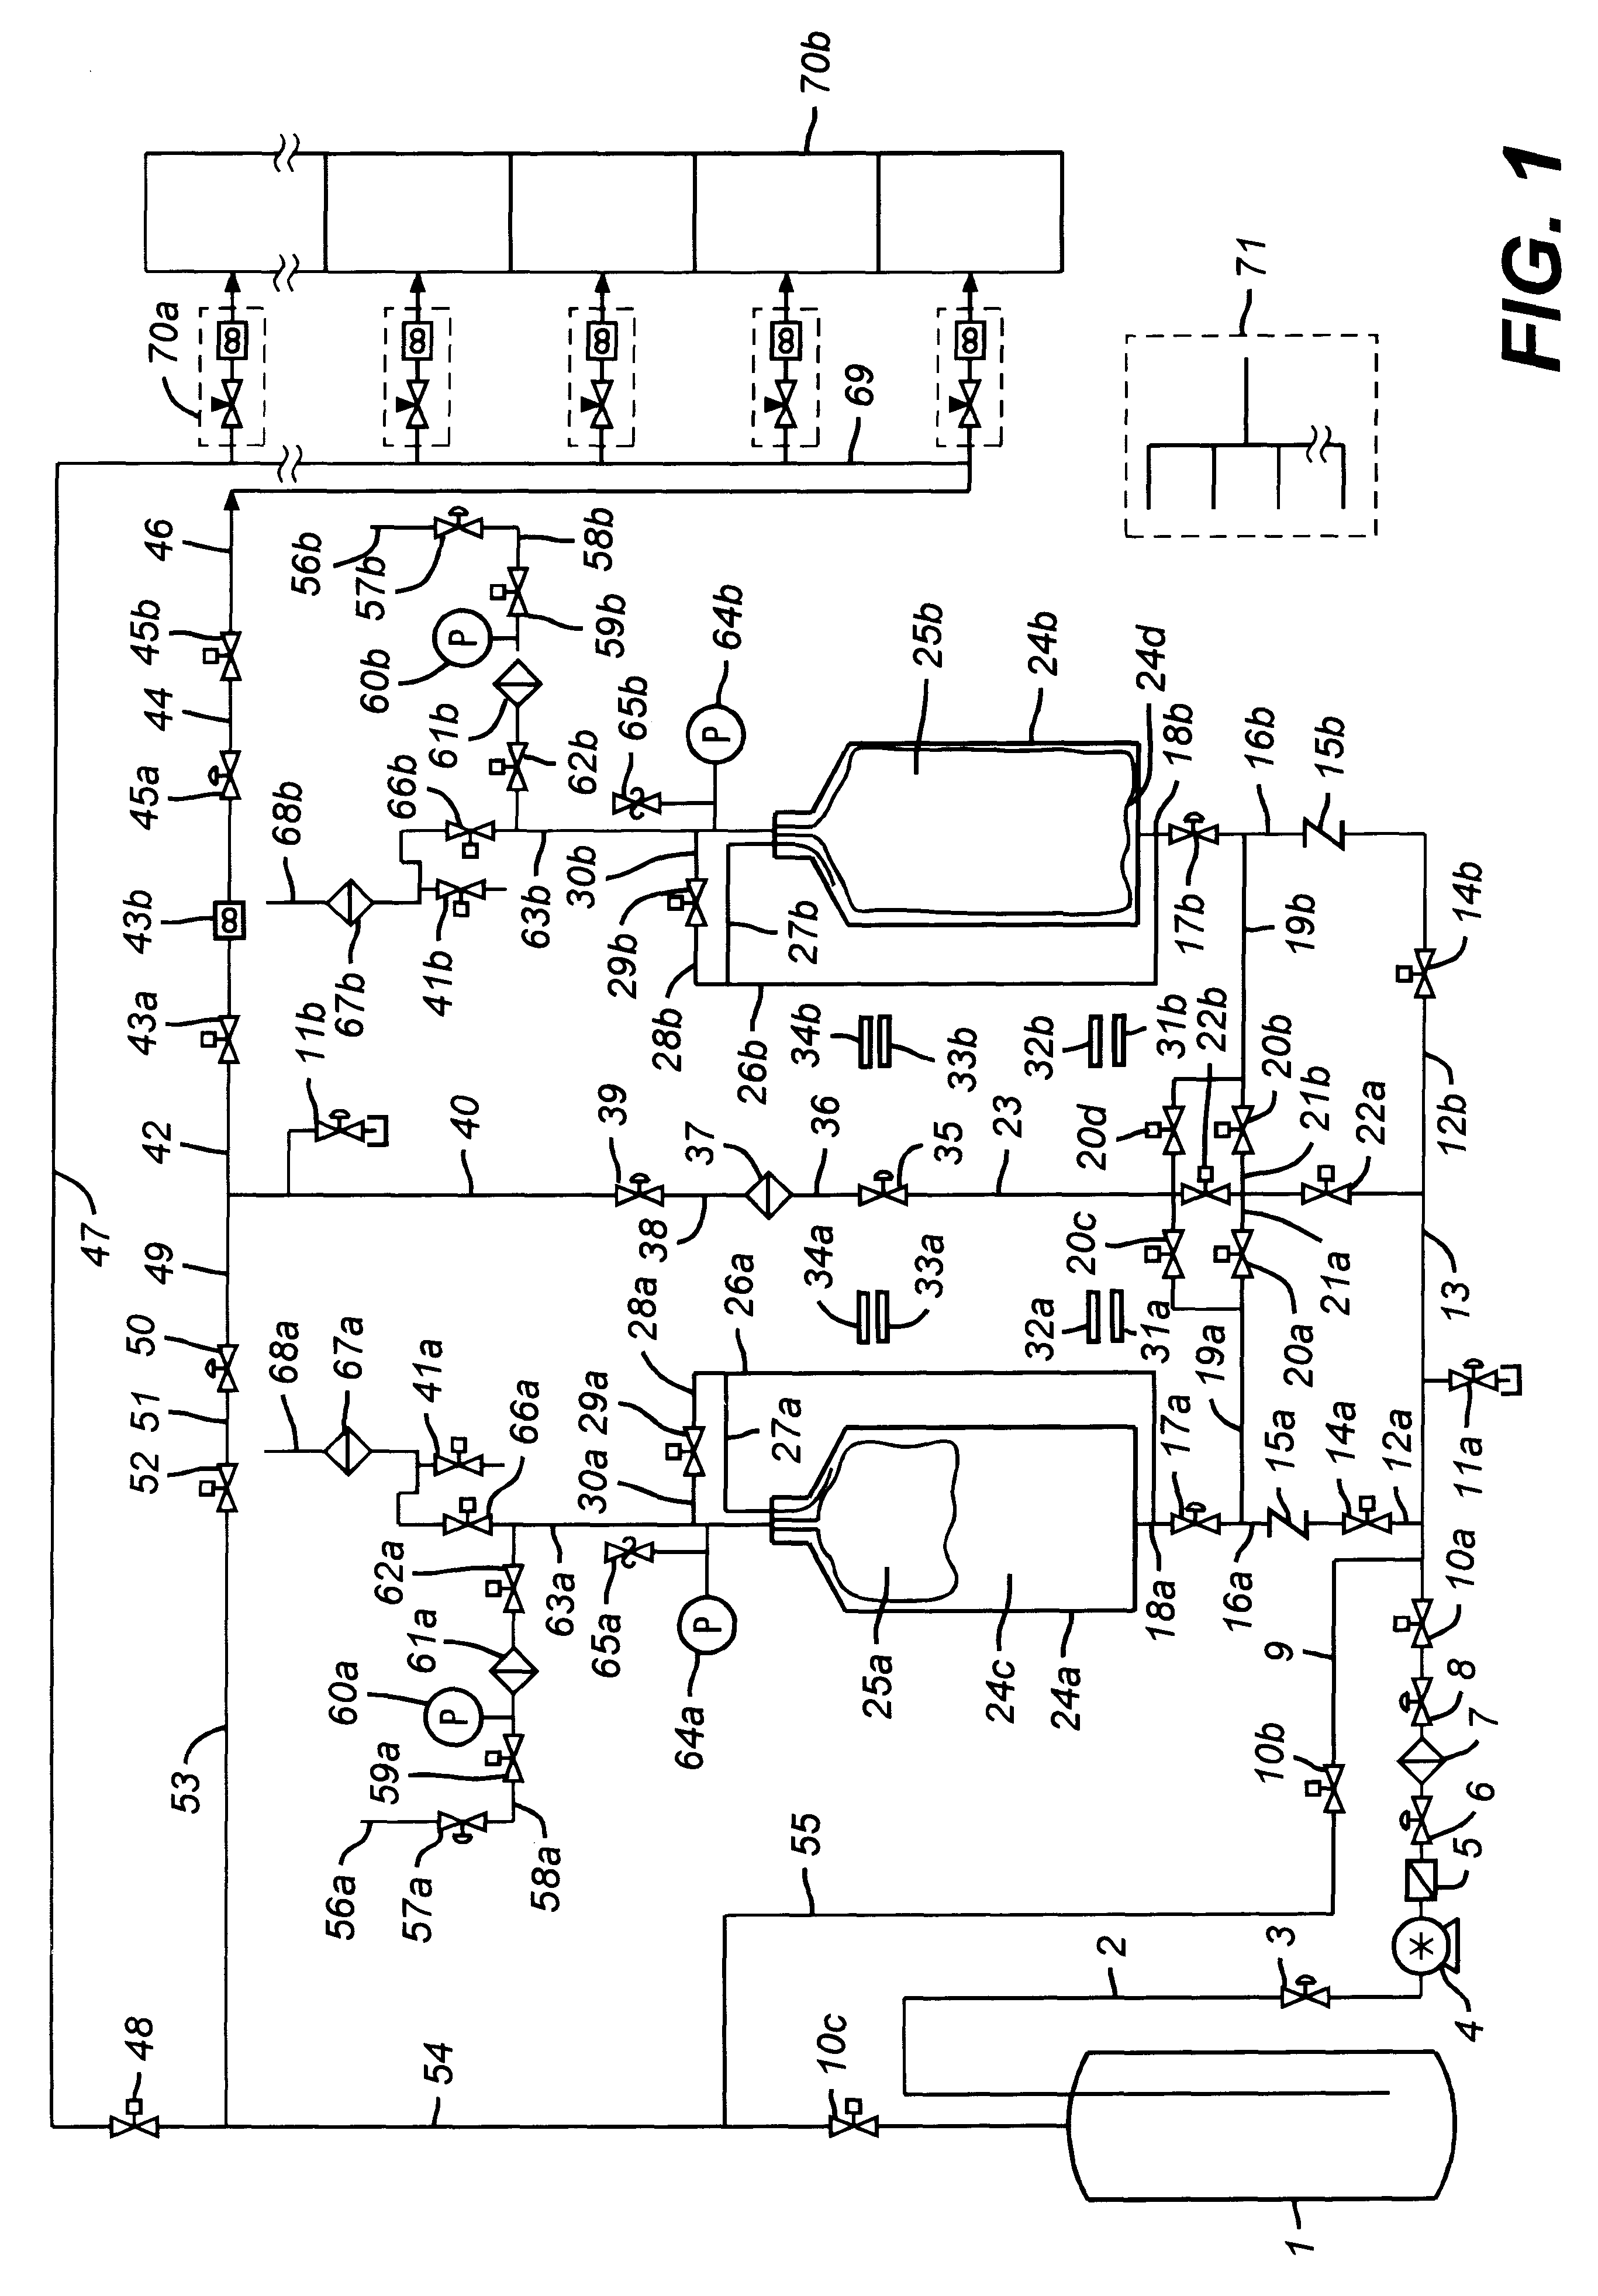 Methods and systems for distributing liquid chemicals